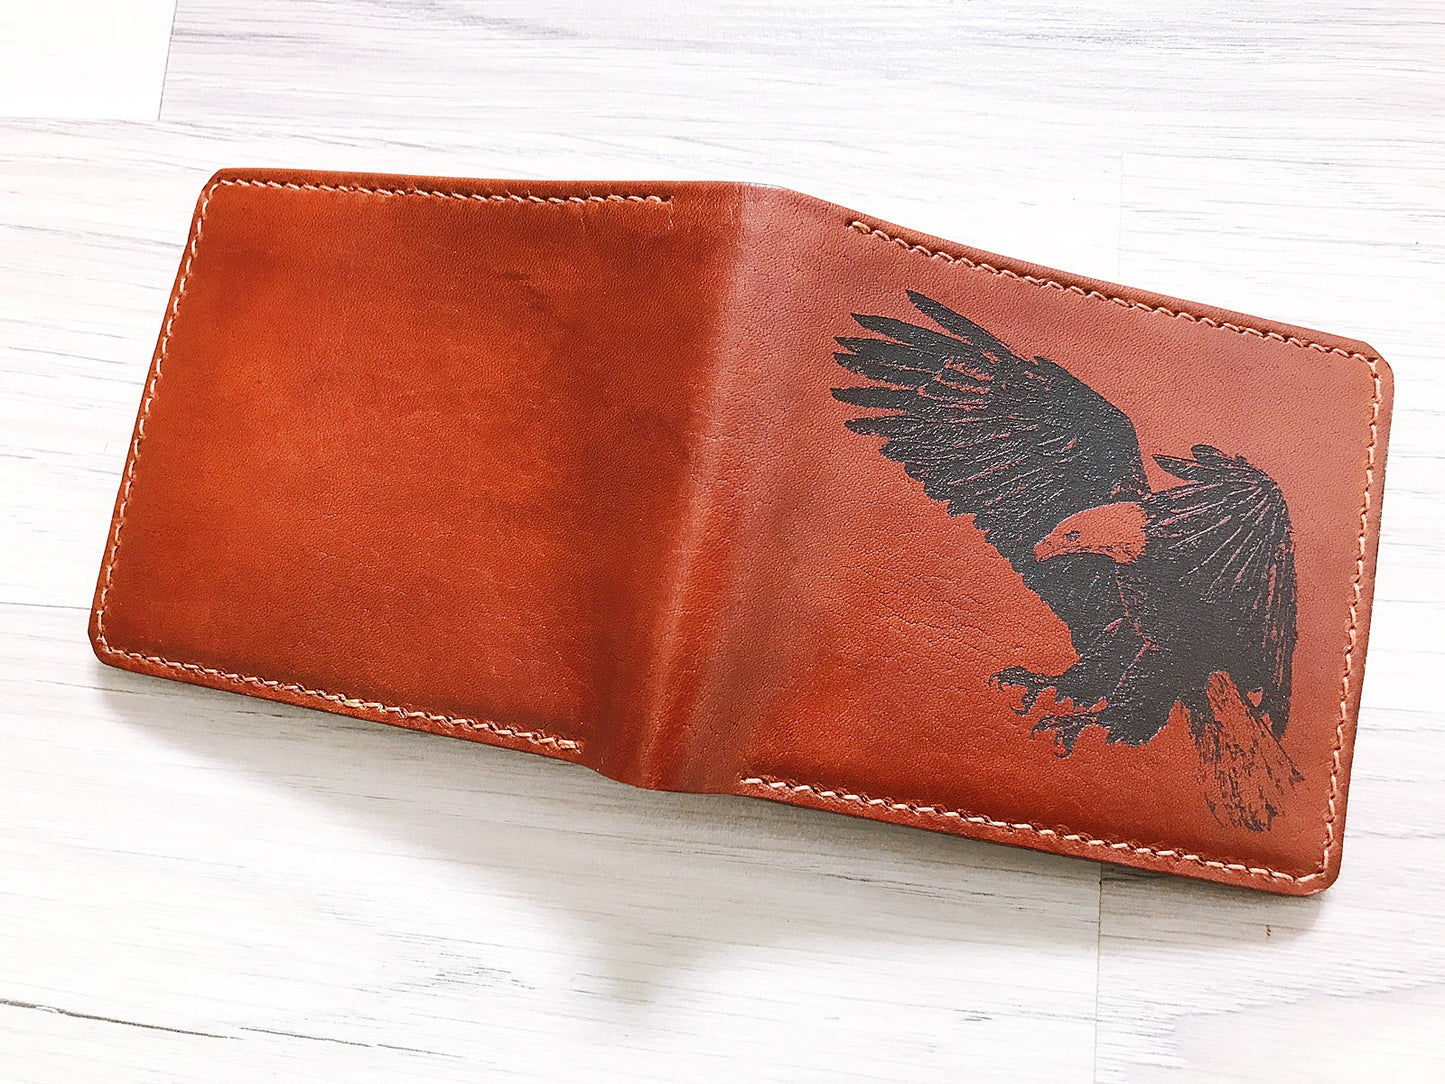 Mayan Corner - Eagle animal leather handmade men's wallet, custom gifts for him, father's day gifts, anniversary gift for men